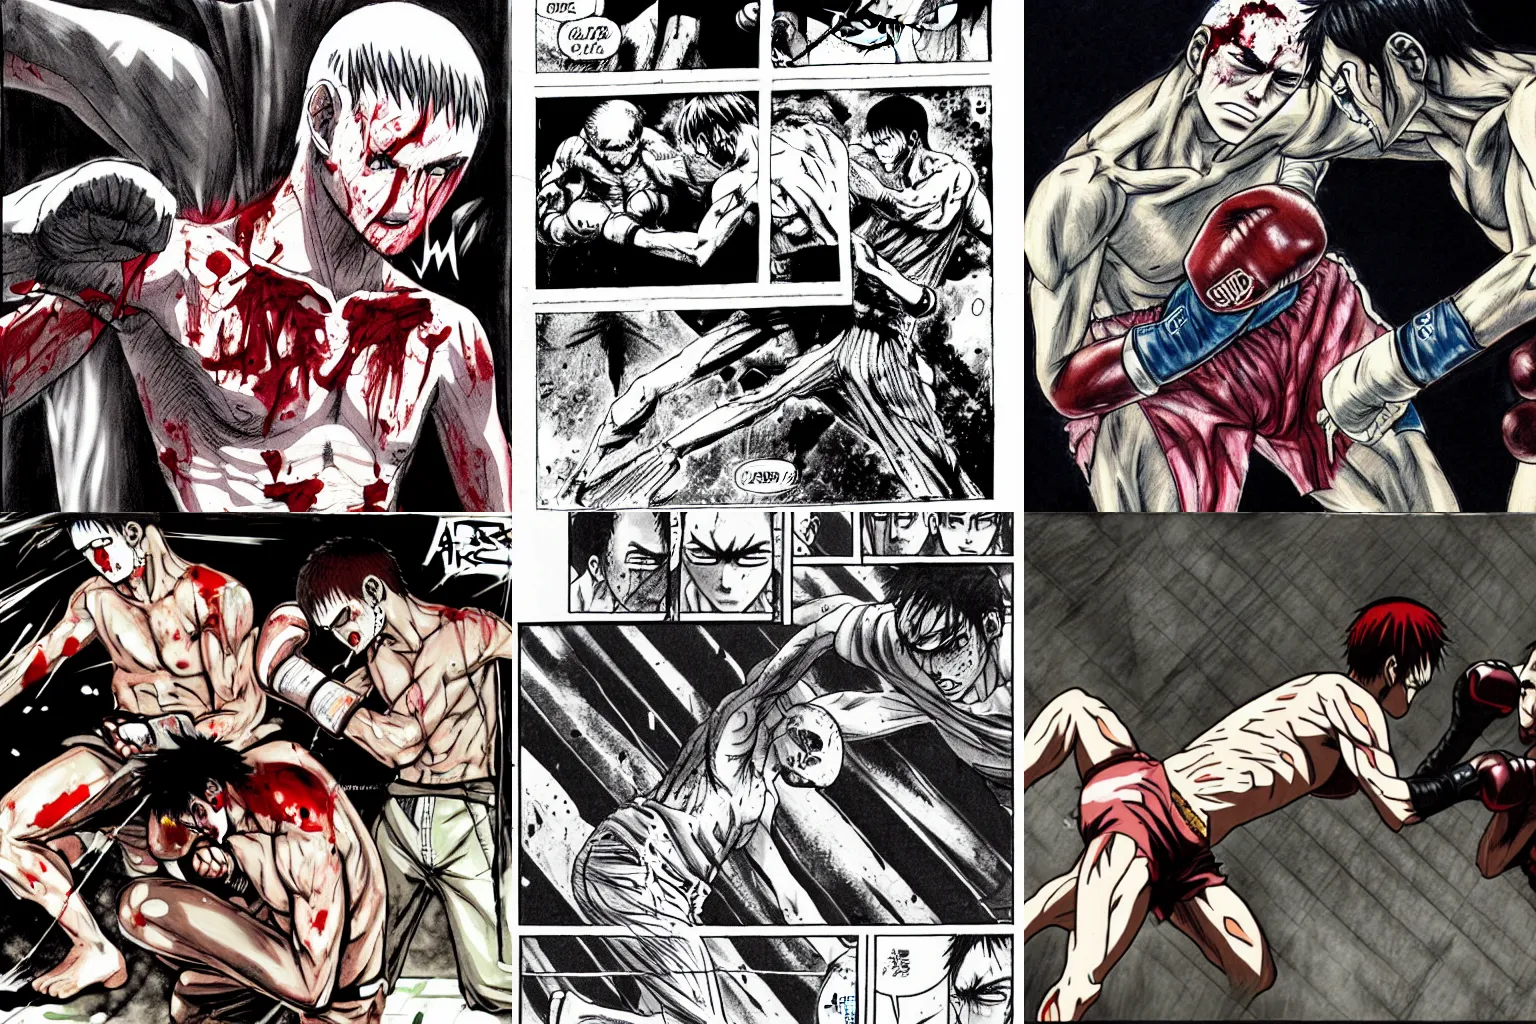 Prompt: boxer in the middle of a fight, bloodied and beaten, art by hajime isayama.